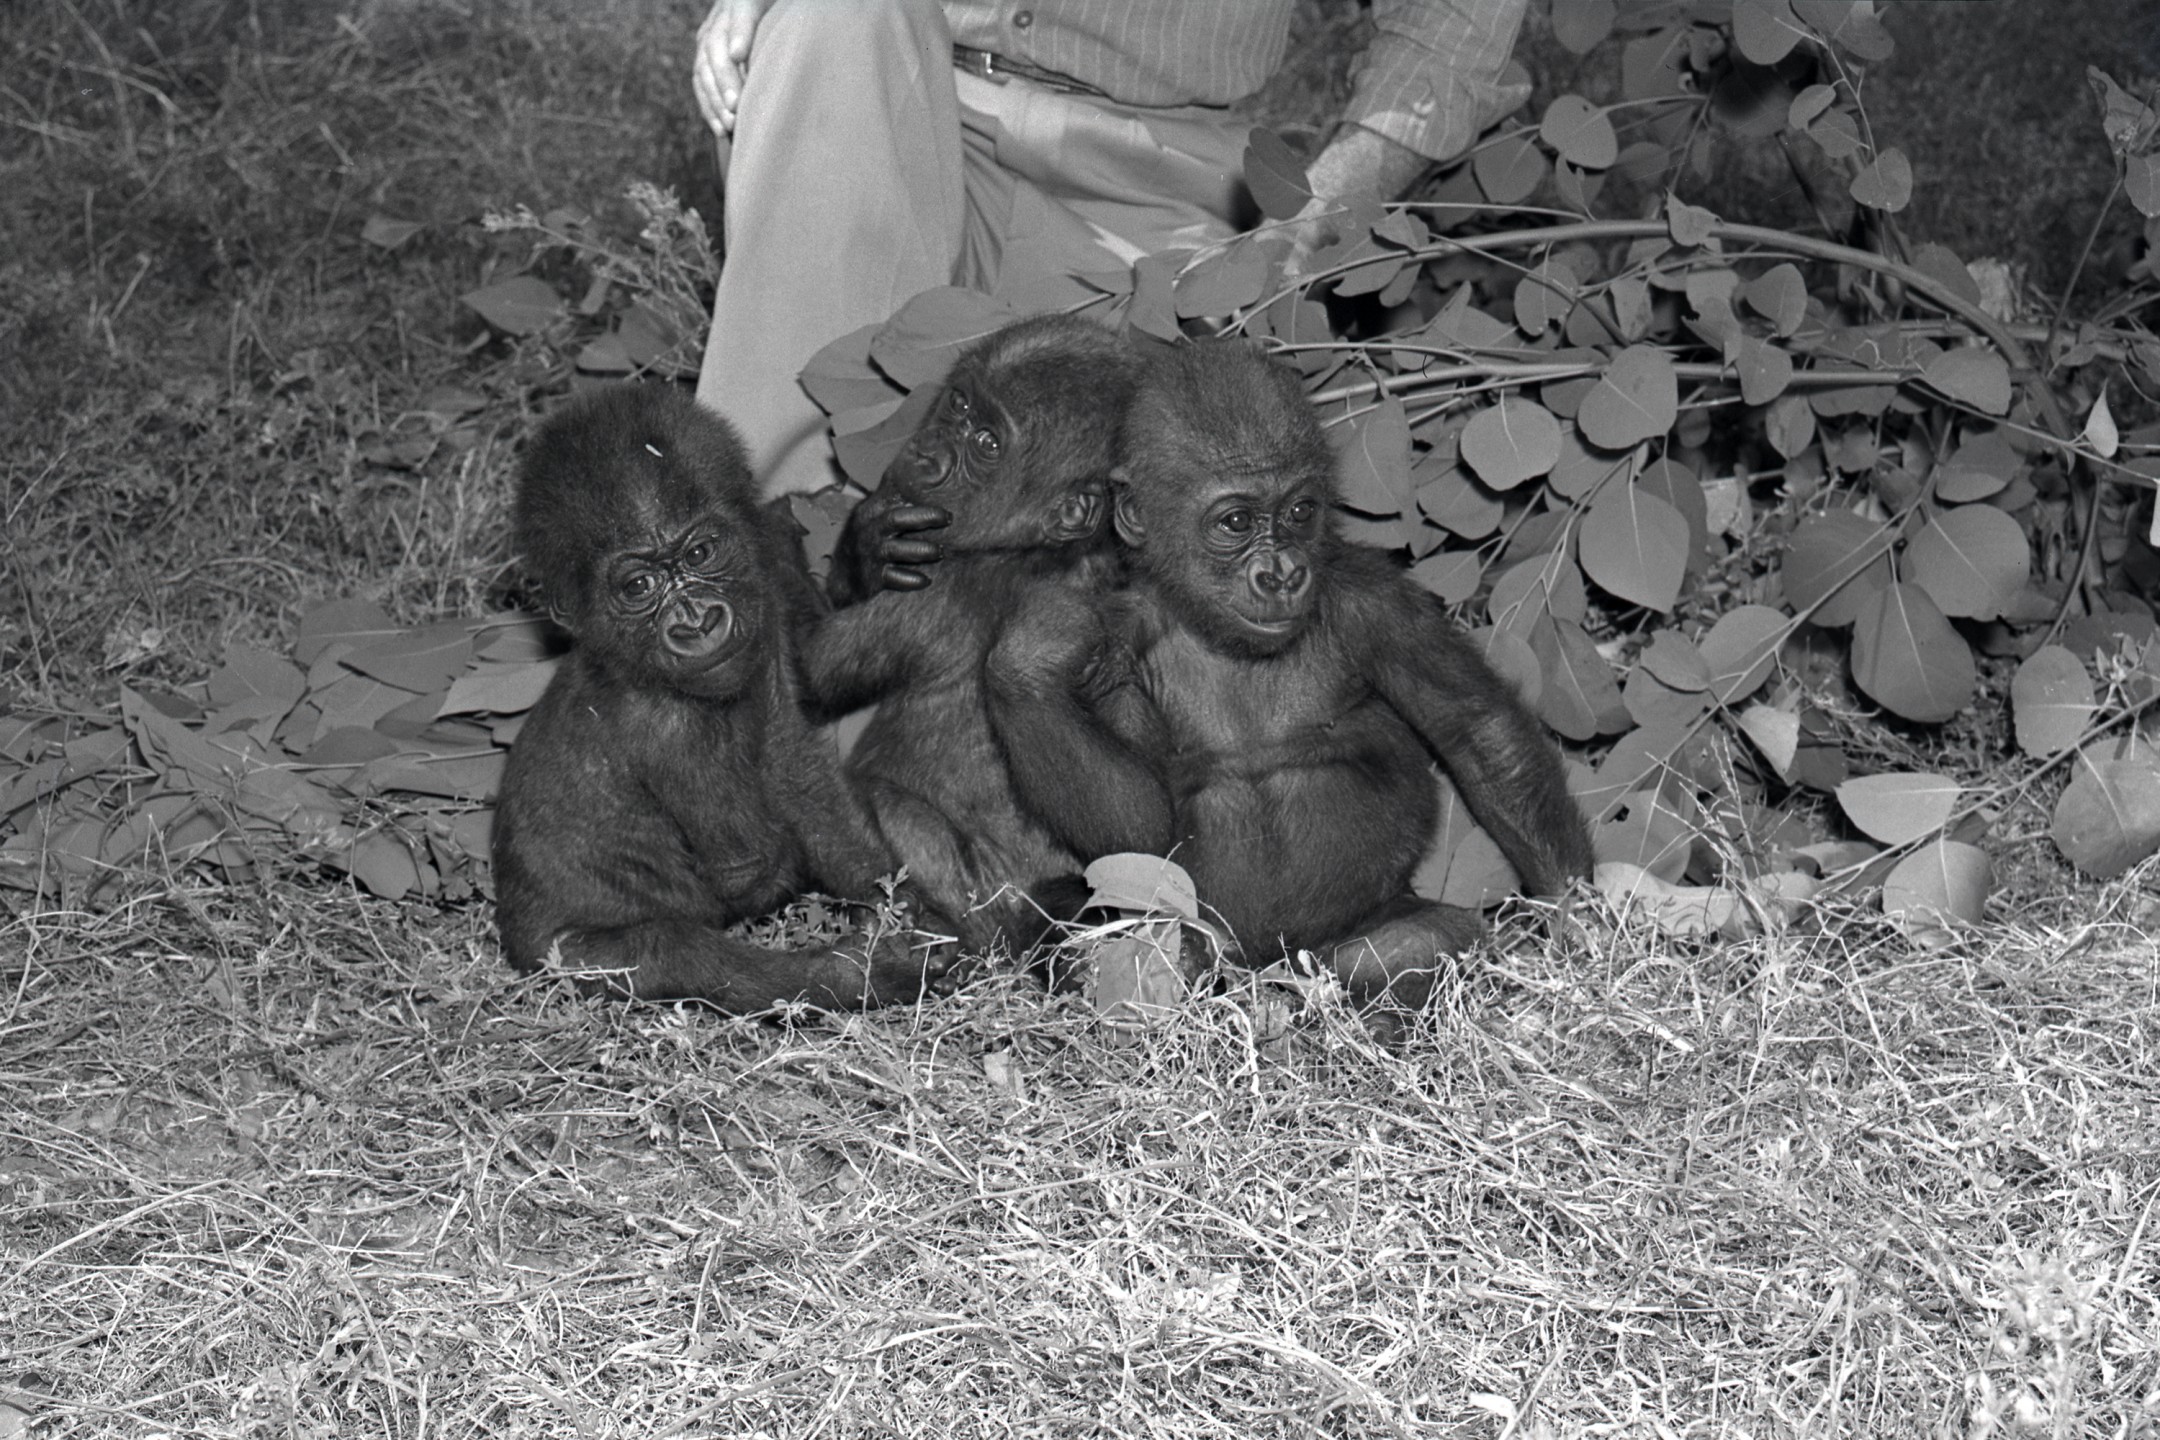 The three gorilla babies had their own set of rooms in the Zoo Hospital and went out for playtime on the lawn in back.